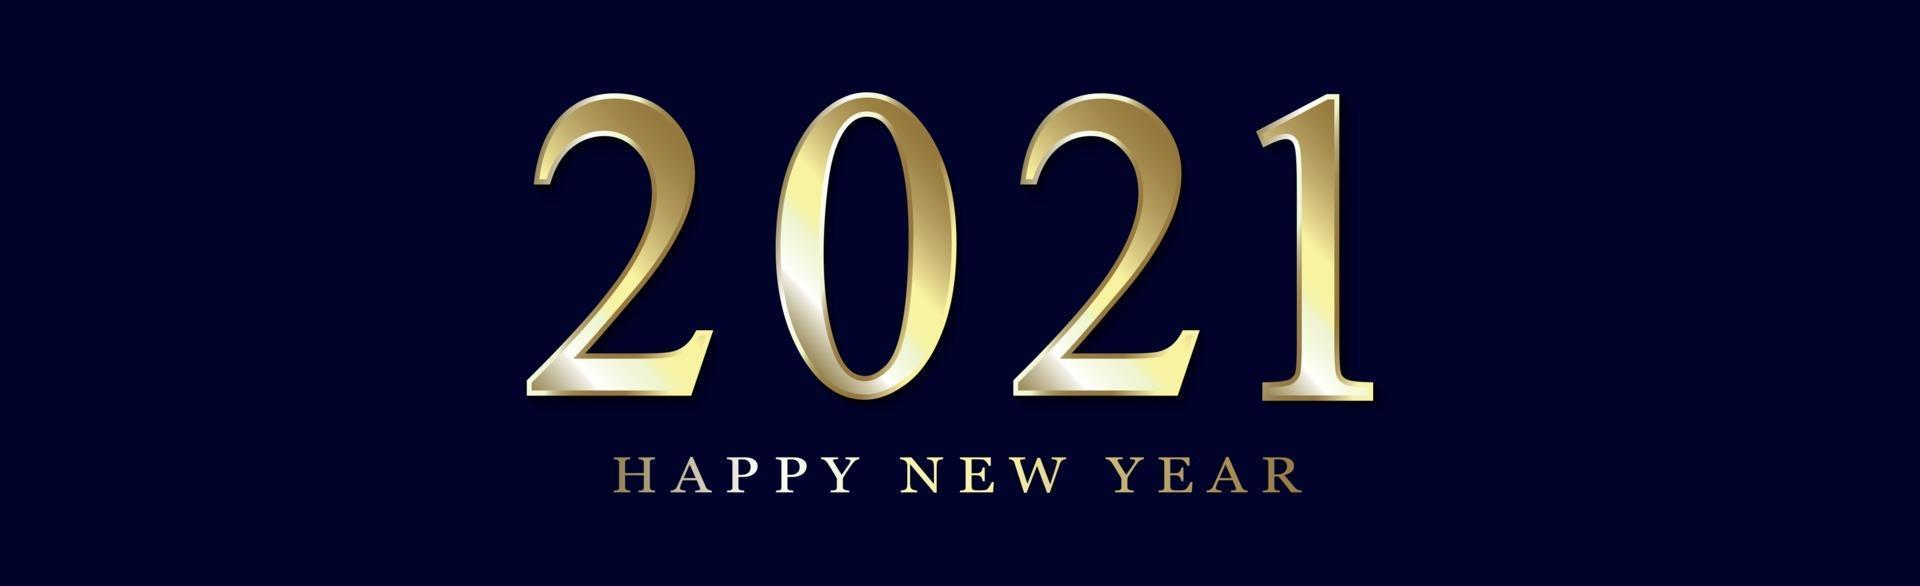 Golden numbers 2021 new year wishes - illustration vector